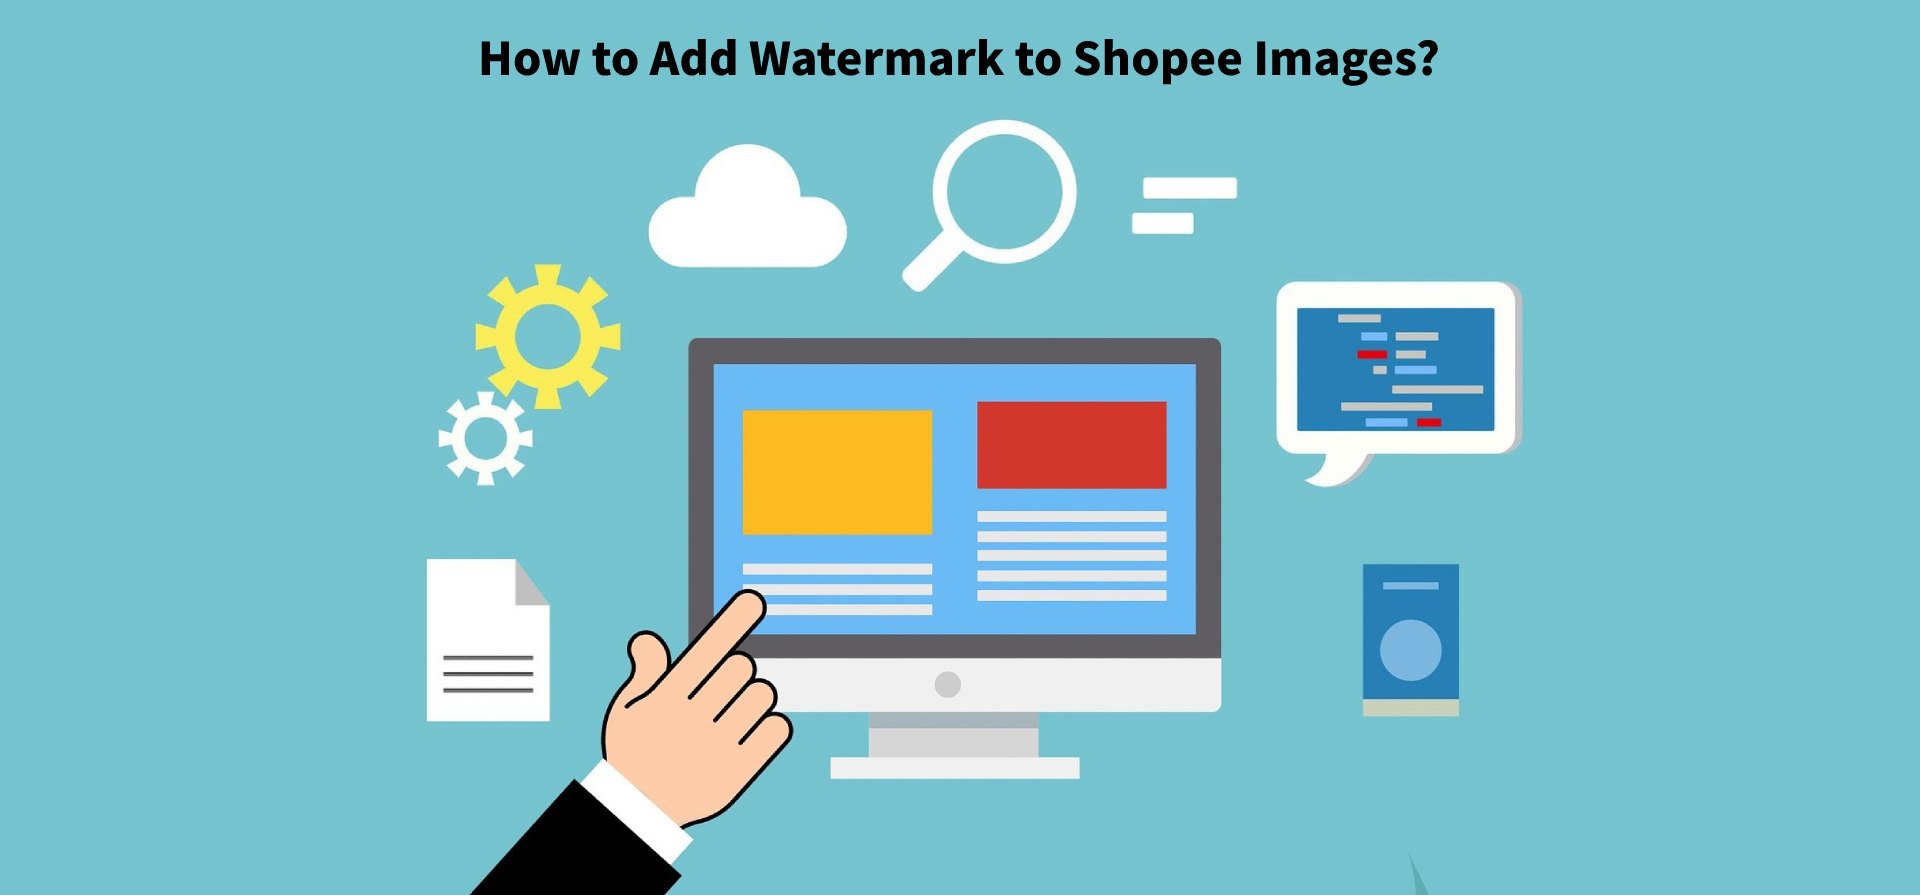 How to Add Watermark to Shopee Images?